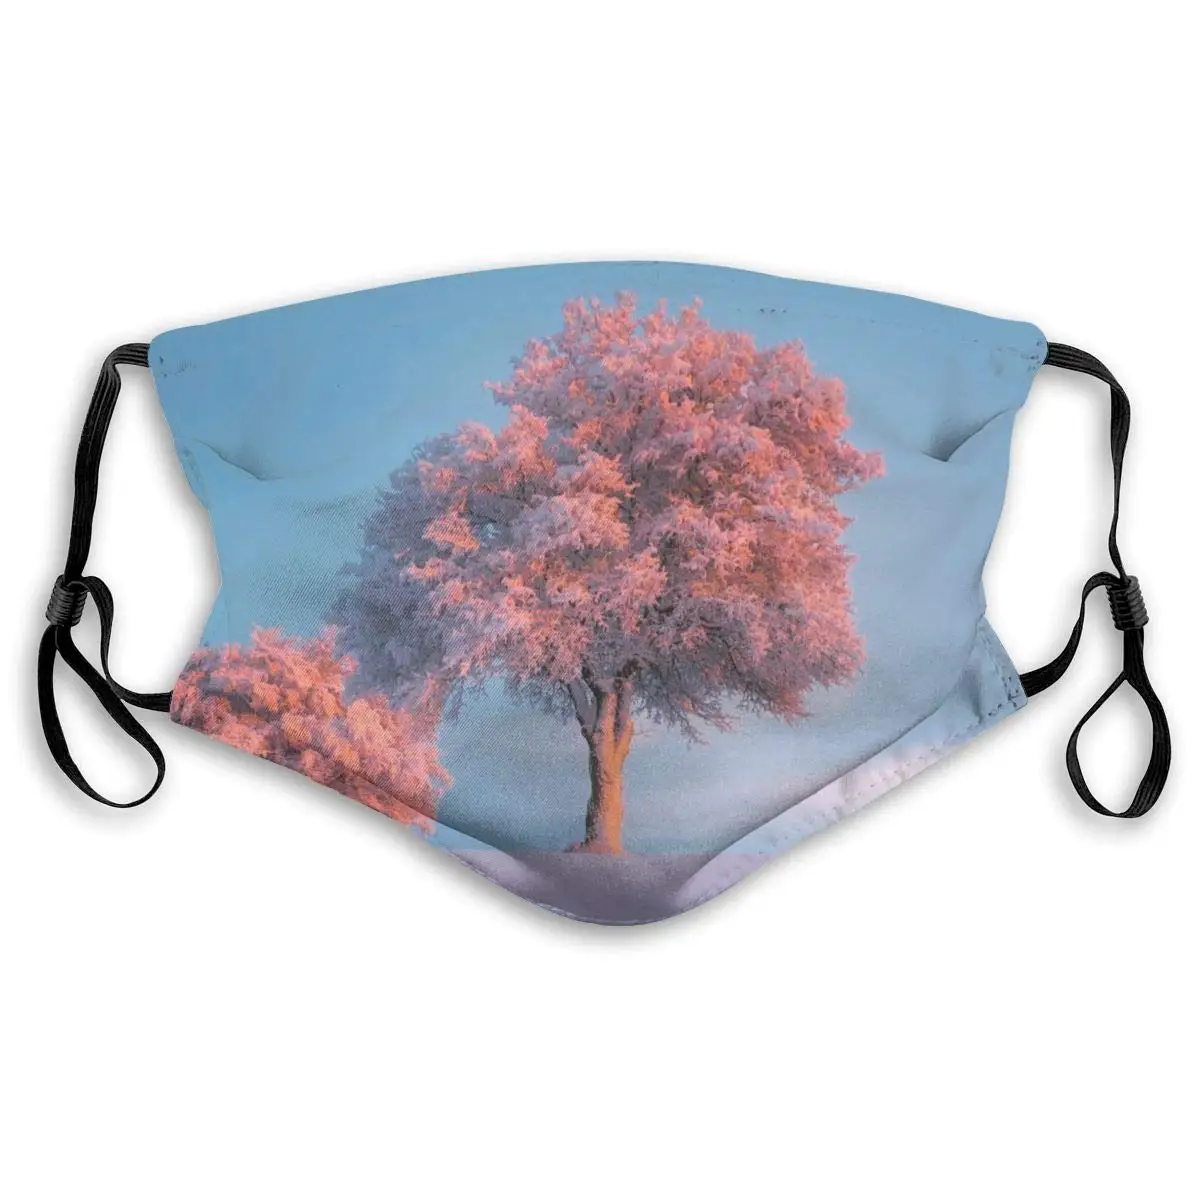 

Pink Trees Printed Maks PM2.5 with Filter Washable Reusable Mask, Cotton Anti Dust Half Face Mouth Mask For Kids Teens Men